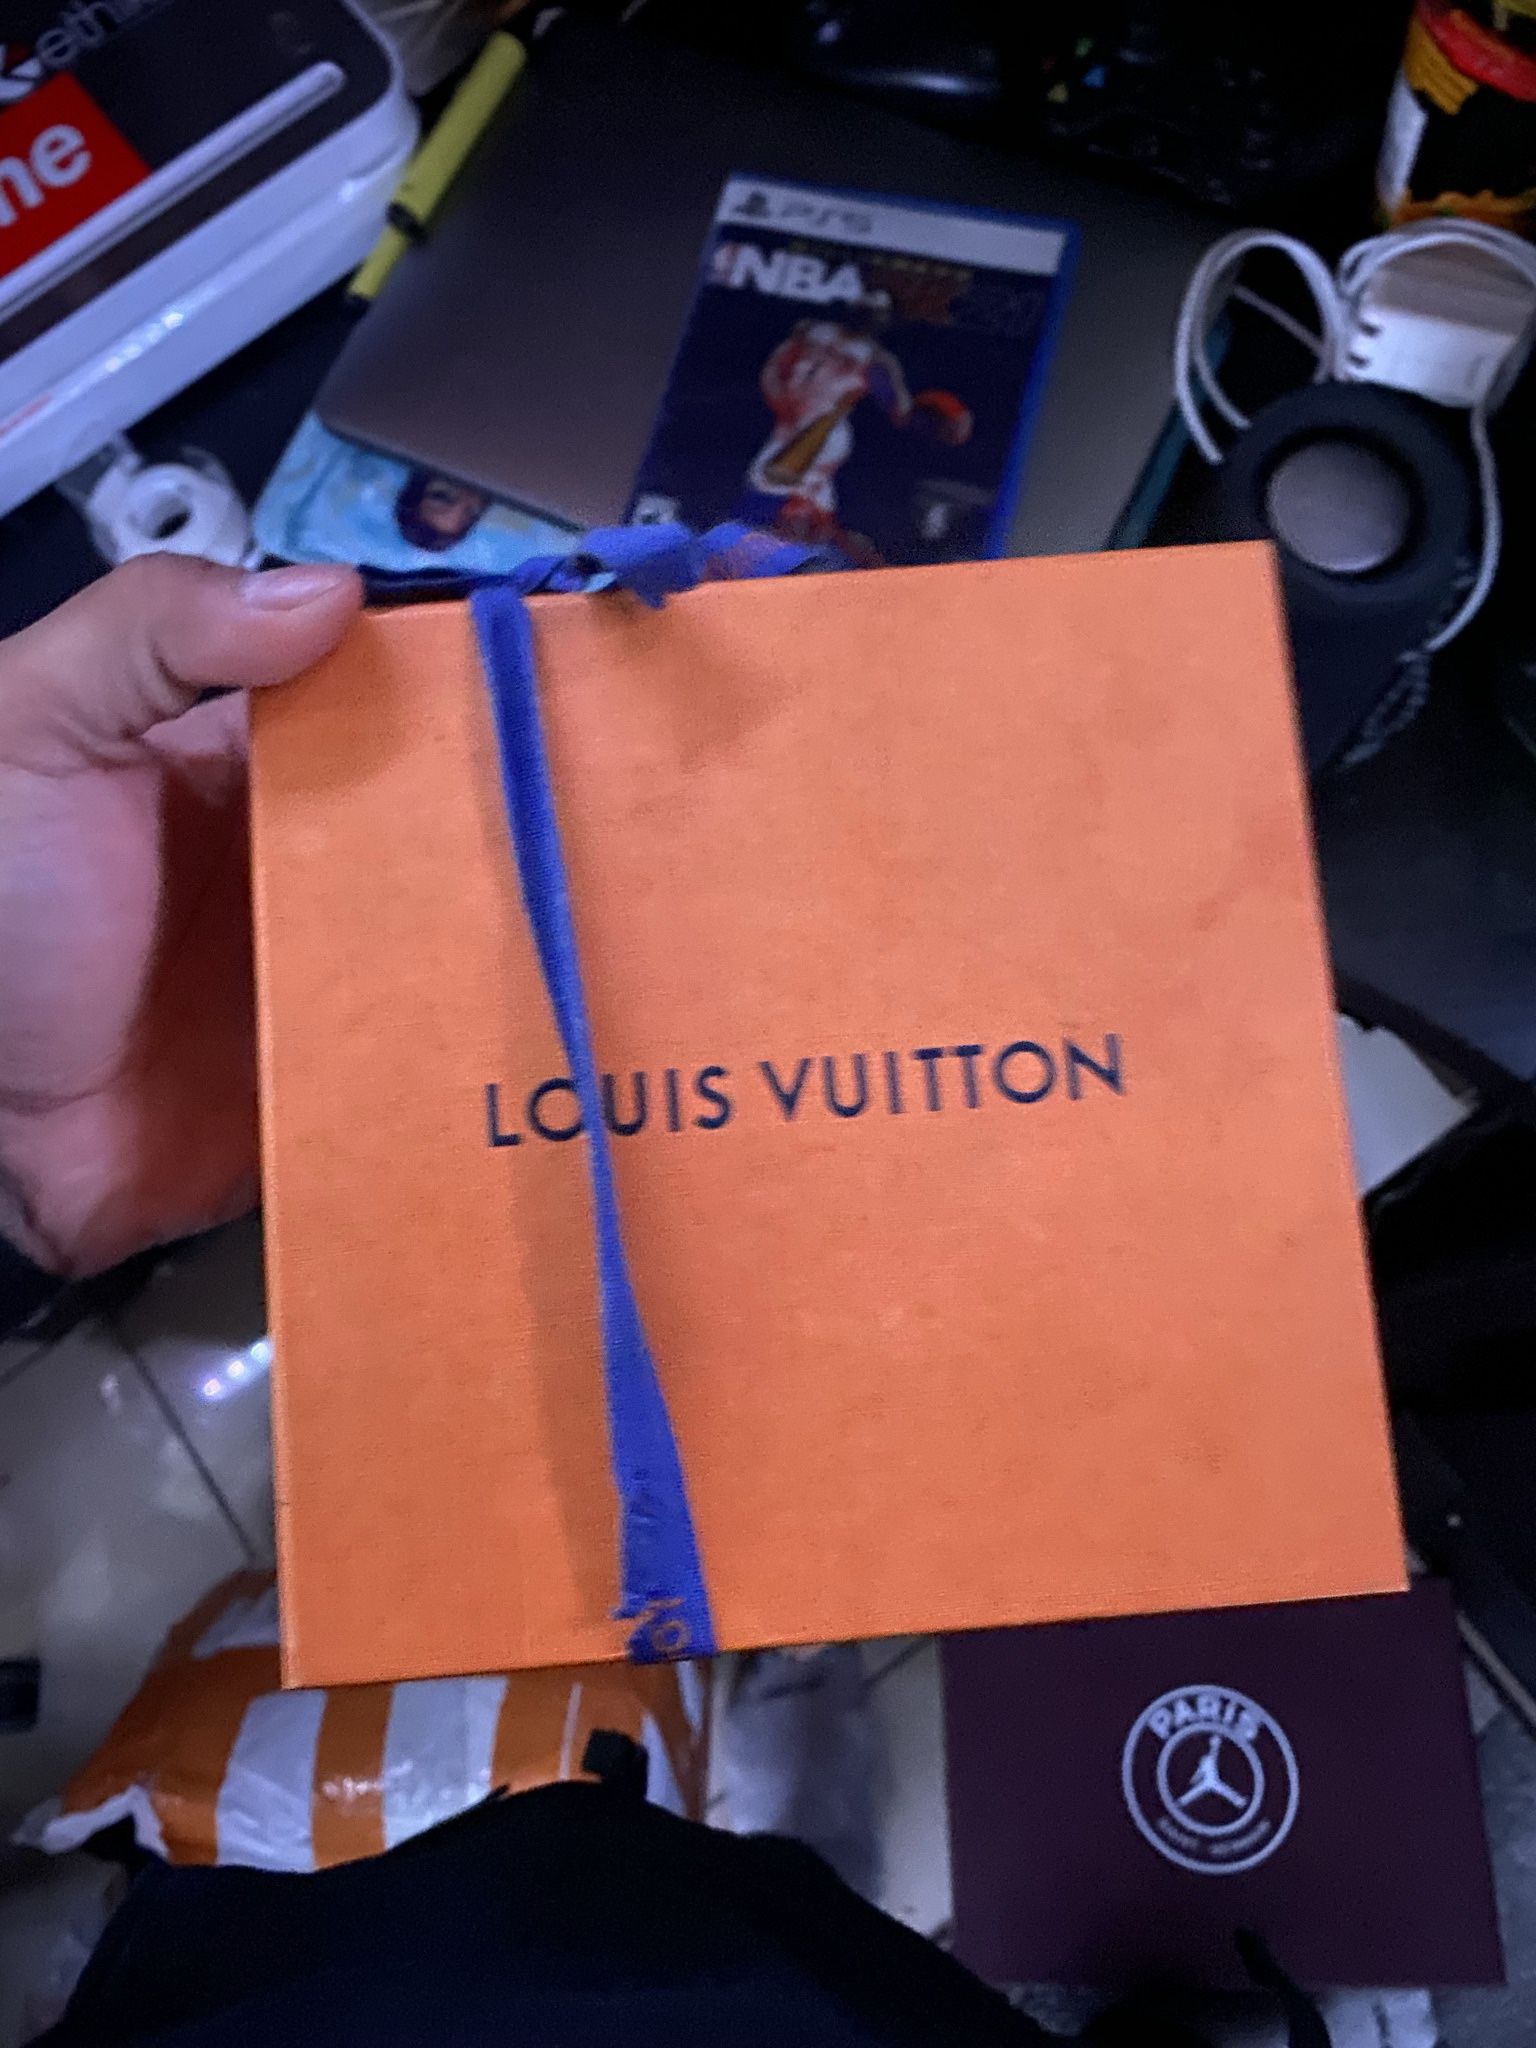 Louis Vuitton Belt. Comes with Saddle Bag, Box, And Louis Vuitton Bag From Store.